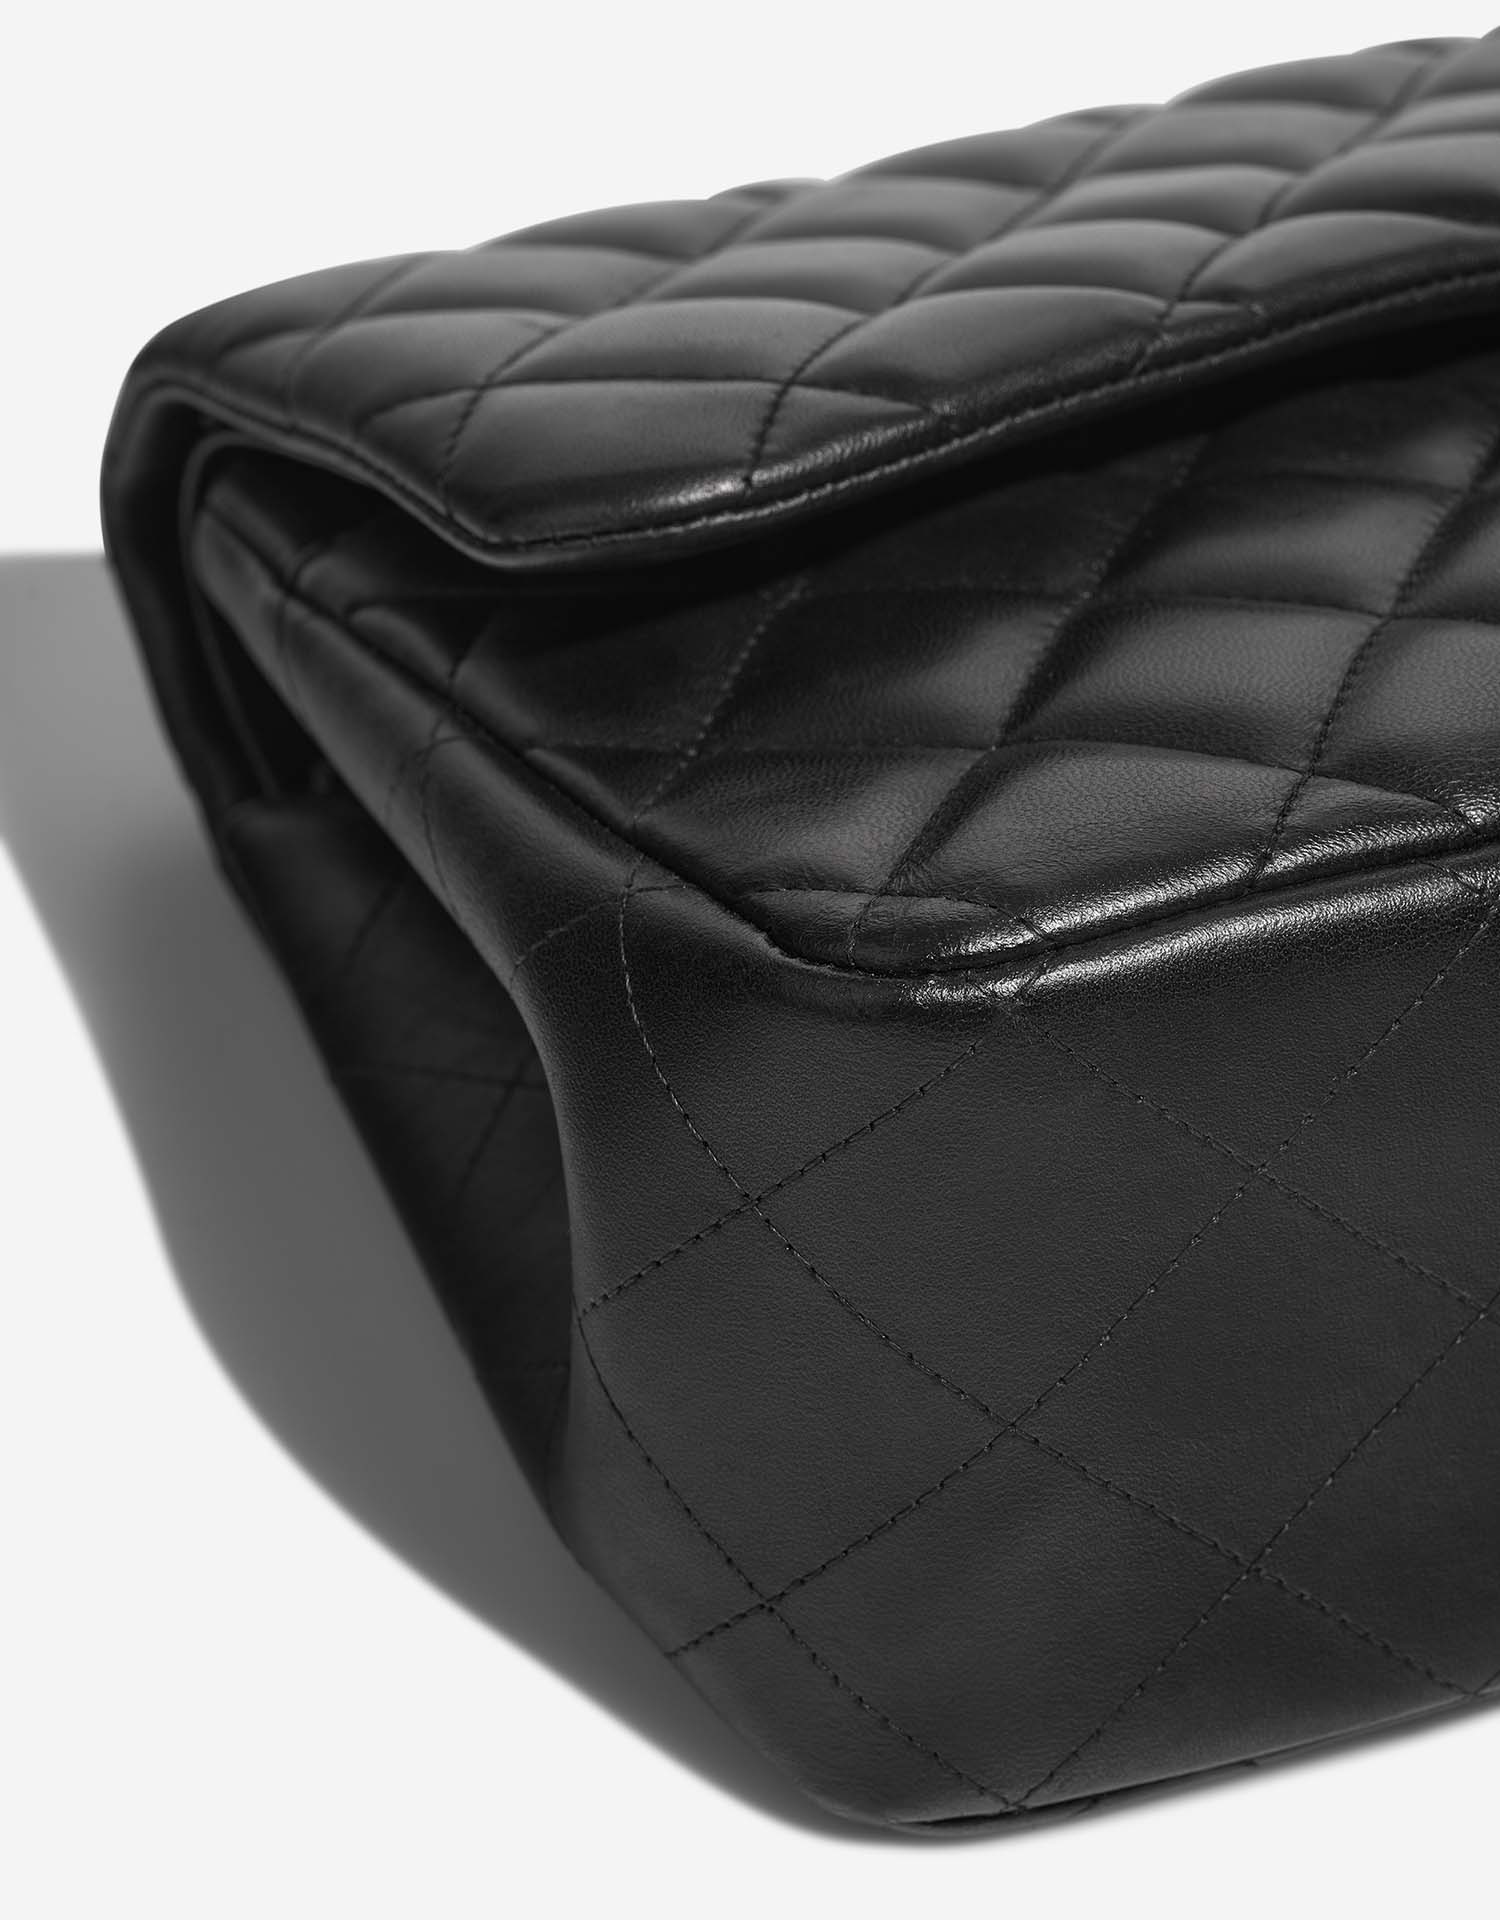 Chanel Timeless Jumbo Black signs of wear| Sell your designer bag on Saclab.com